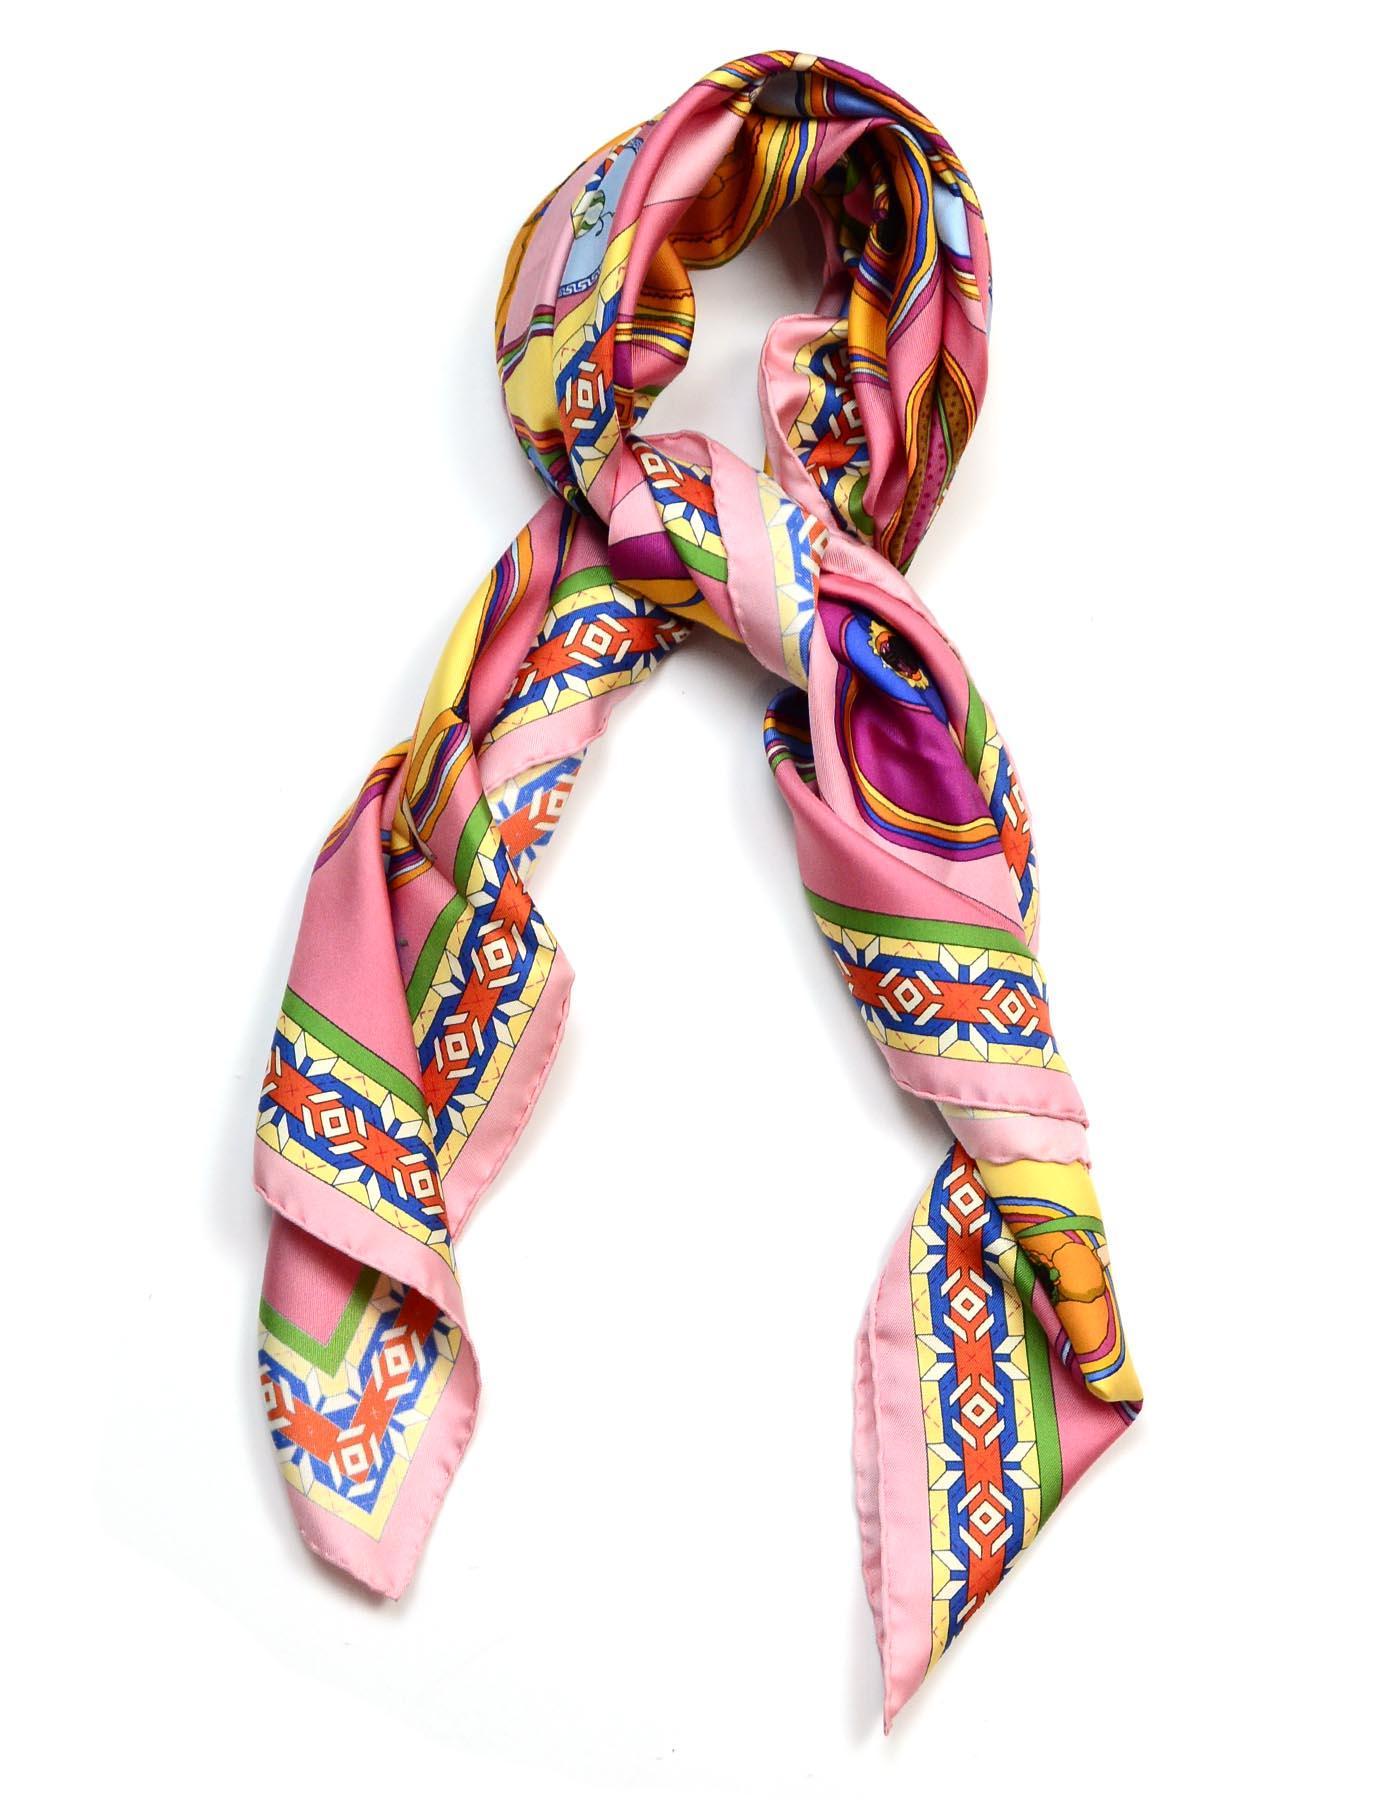 Hermes Pink/Multicolor Collector's Belles Du Mexique 90CM Silk Scarf

Made In:  France
Color: Pink/multi-color
Materials: 100% silk
Overall Condition: Excellent pre-owned condition with exception of very small pull in fabric 
Includes:  Hermes box,